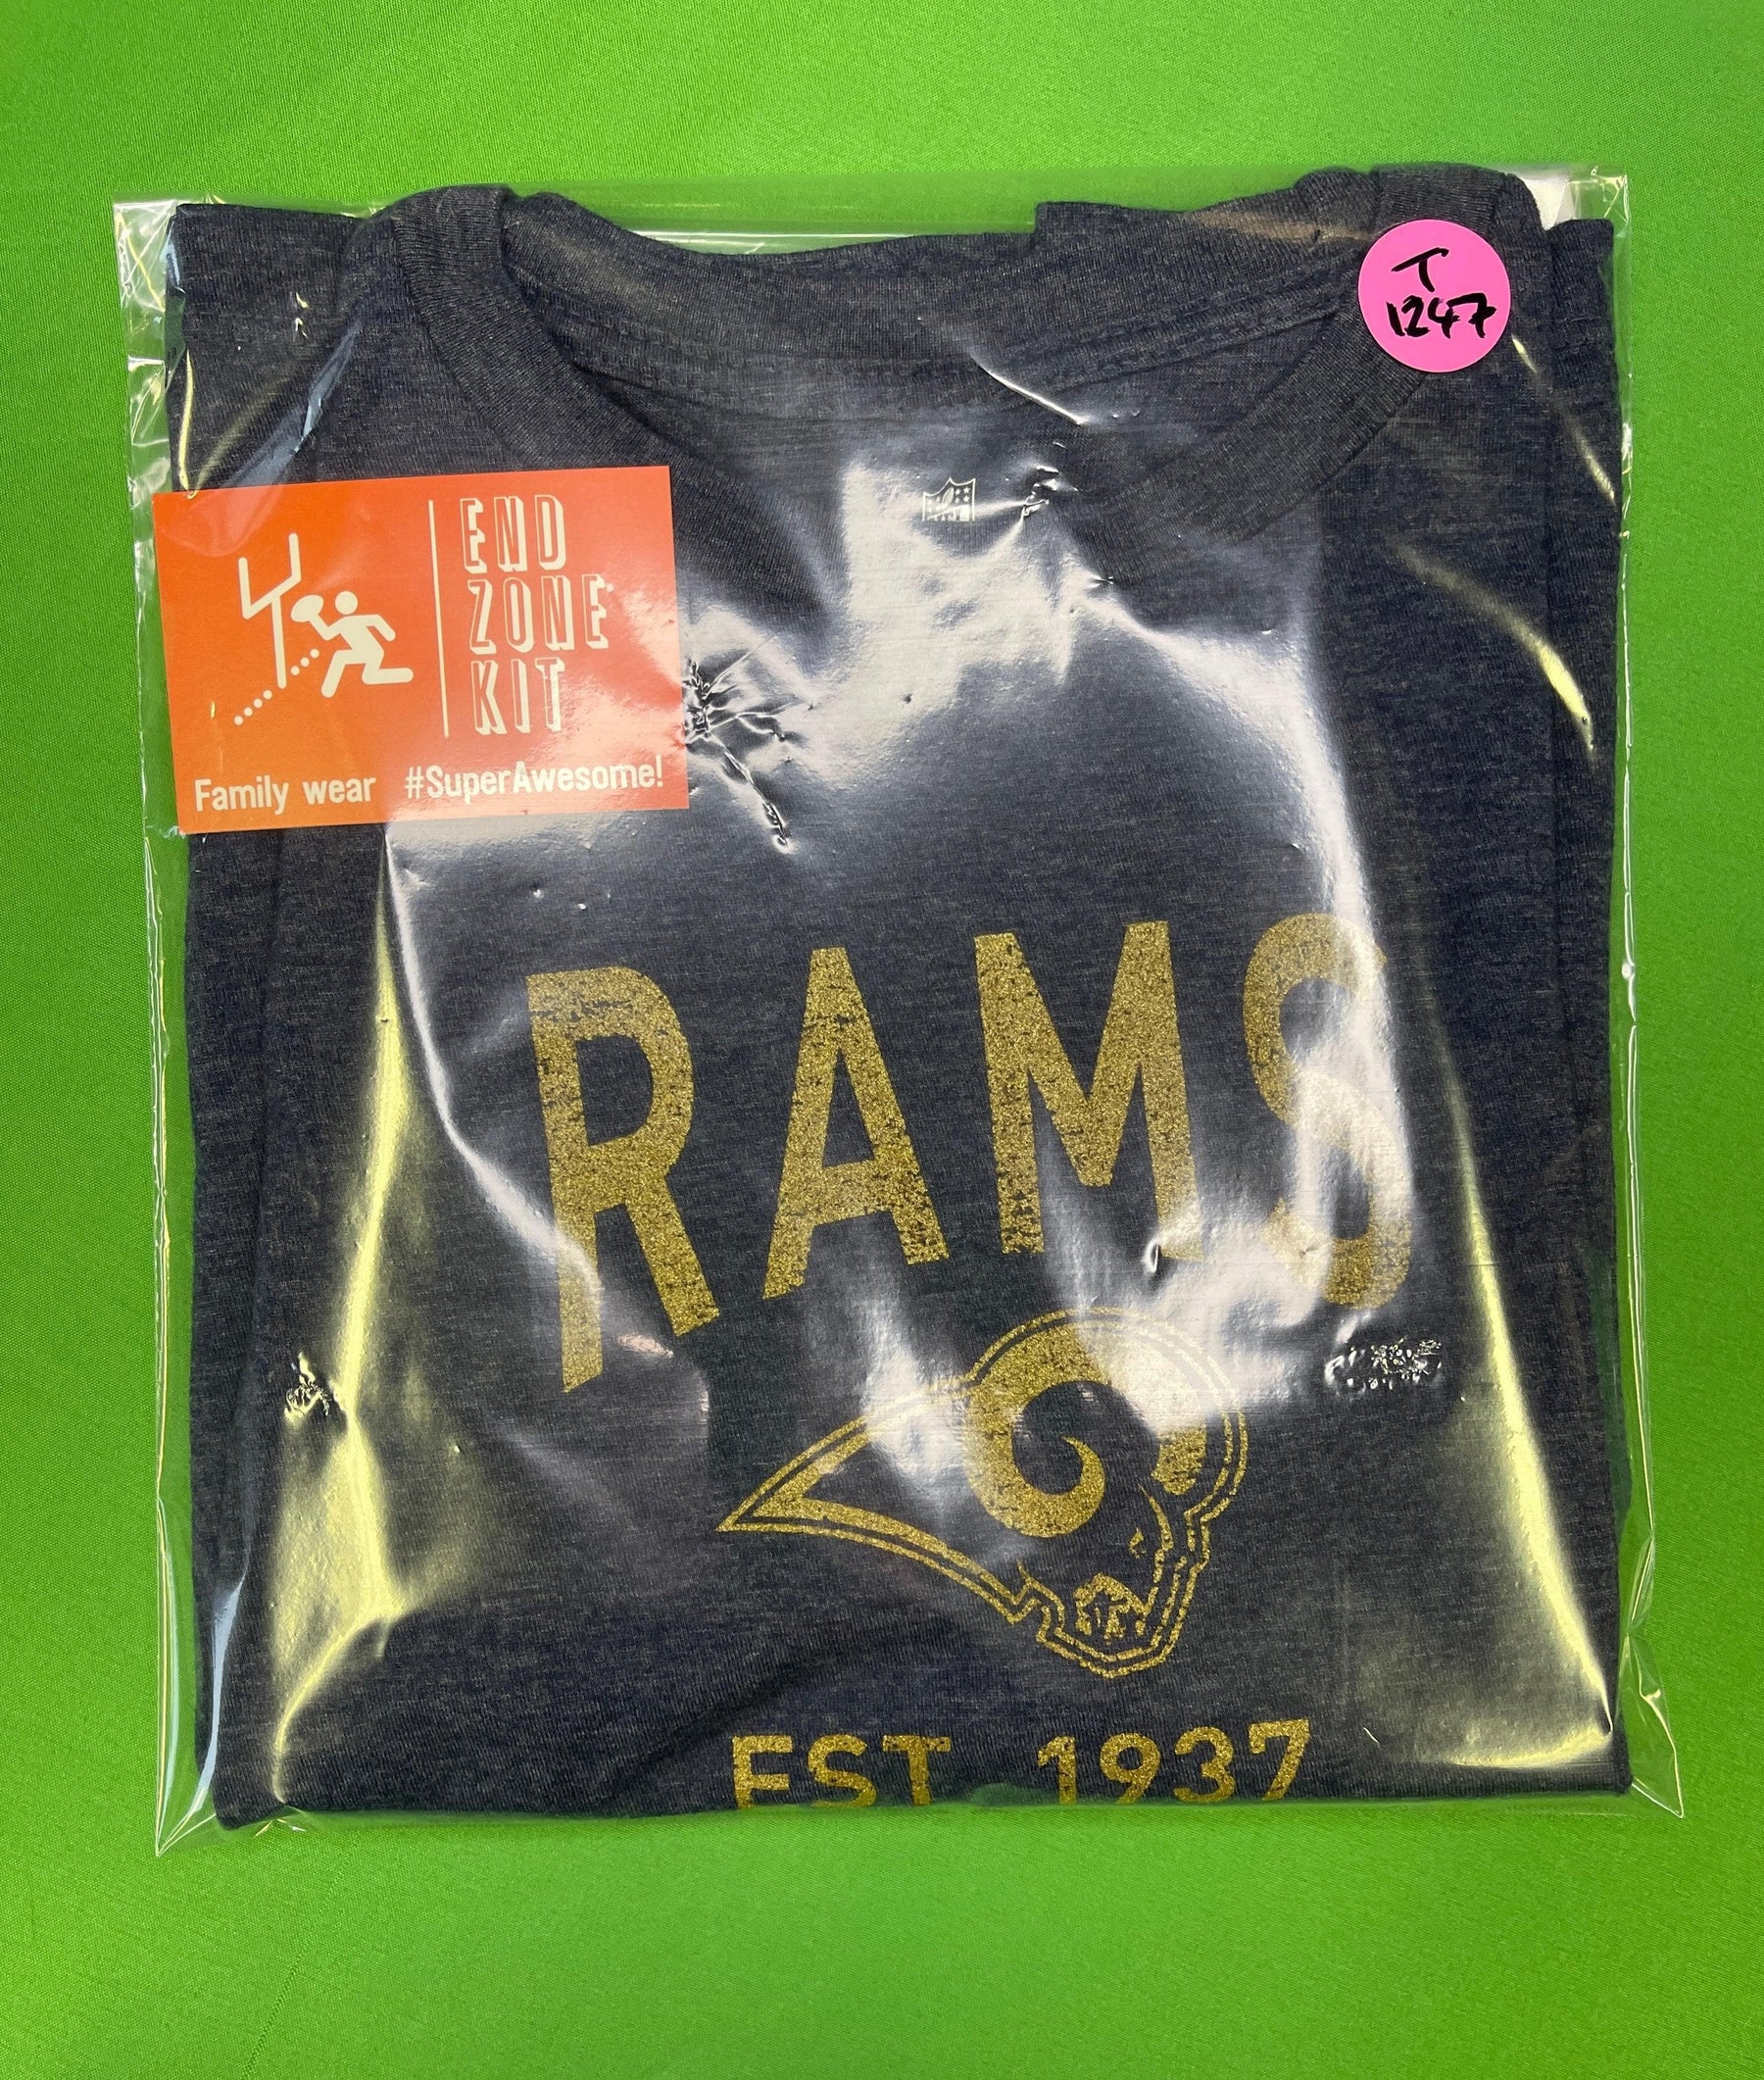 NFL Los Angeles Rams Heathered Blue T-Shirt Youth Small 8